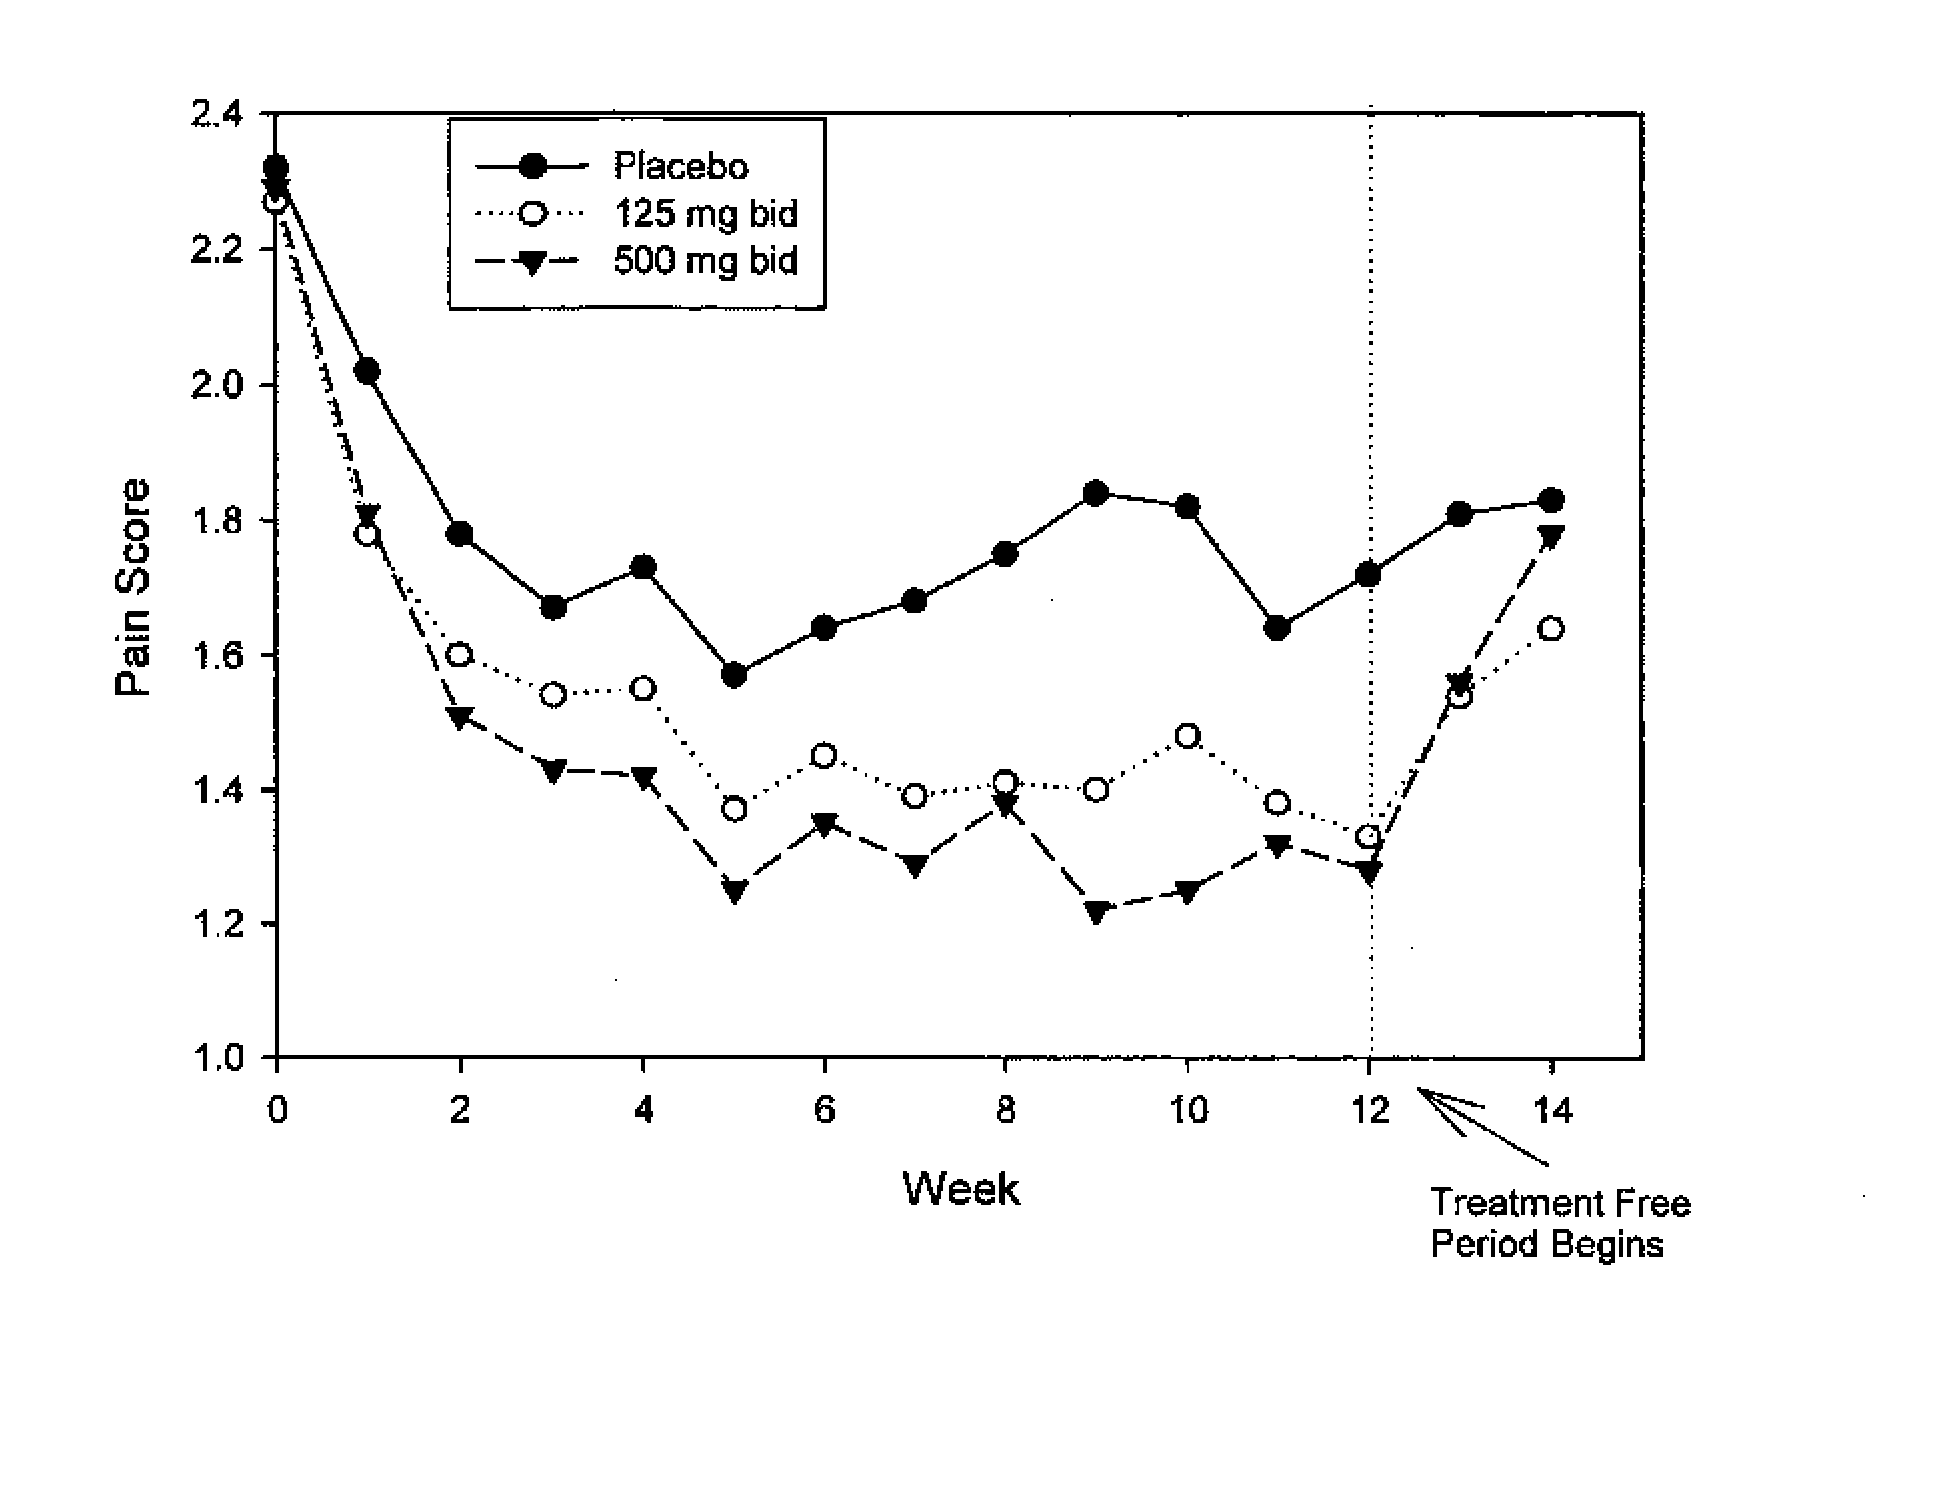 Method for Treatment of Constipation-Predominant Irritable Bowel Syndrome